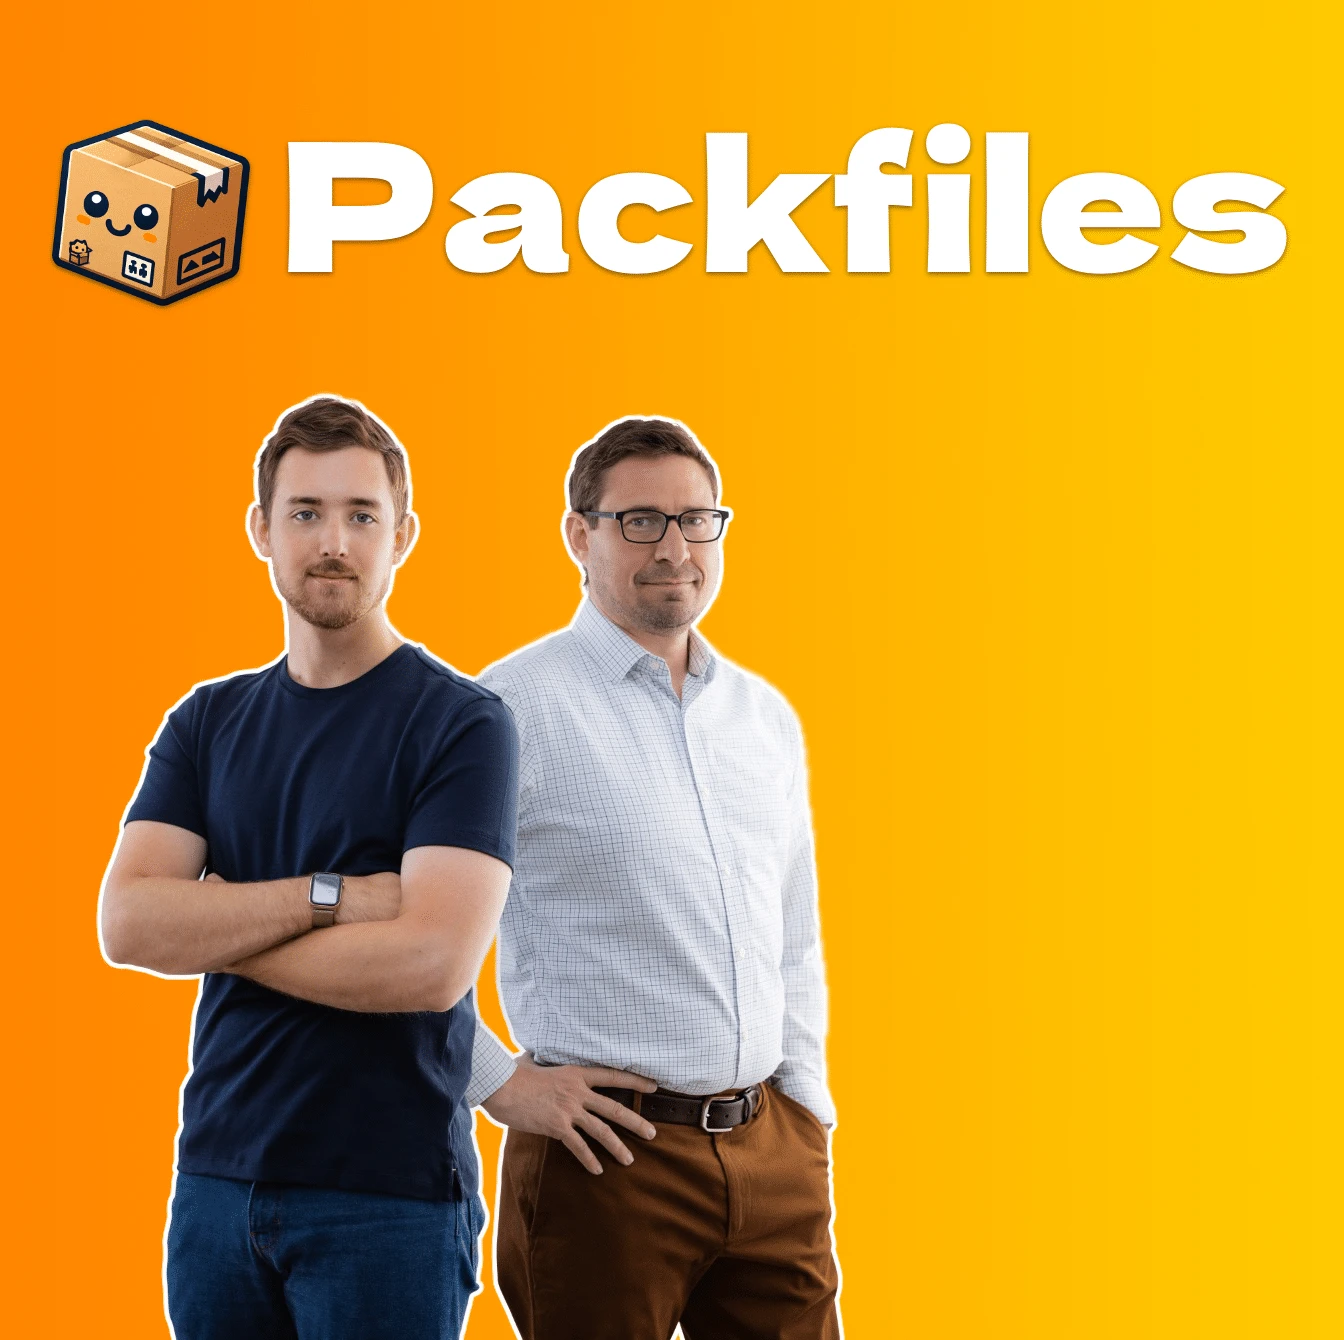 Charlton & Rob, founders of Packfiles.